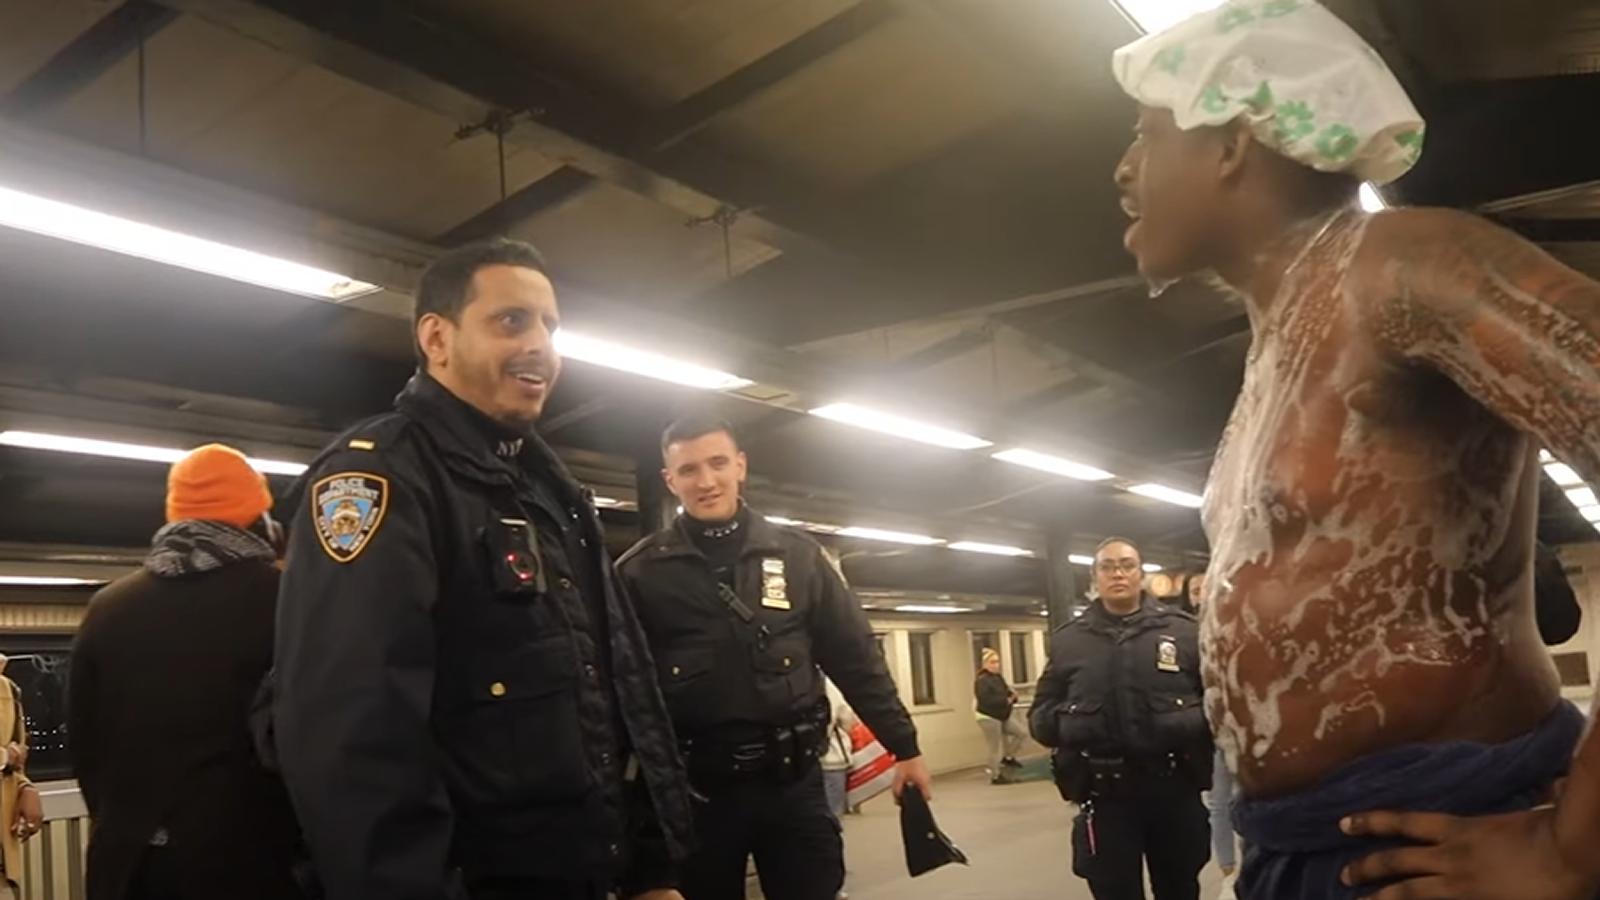 Man's prank ends with police involvement after taking shower on NYC subway